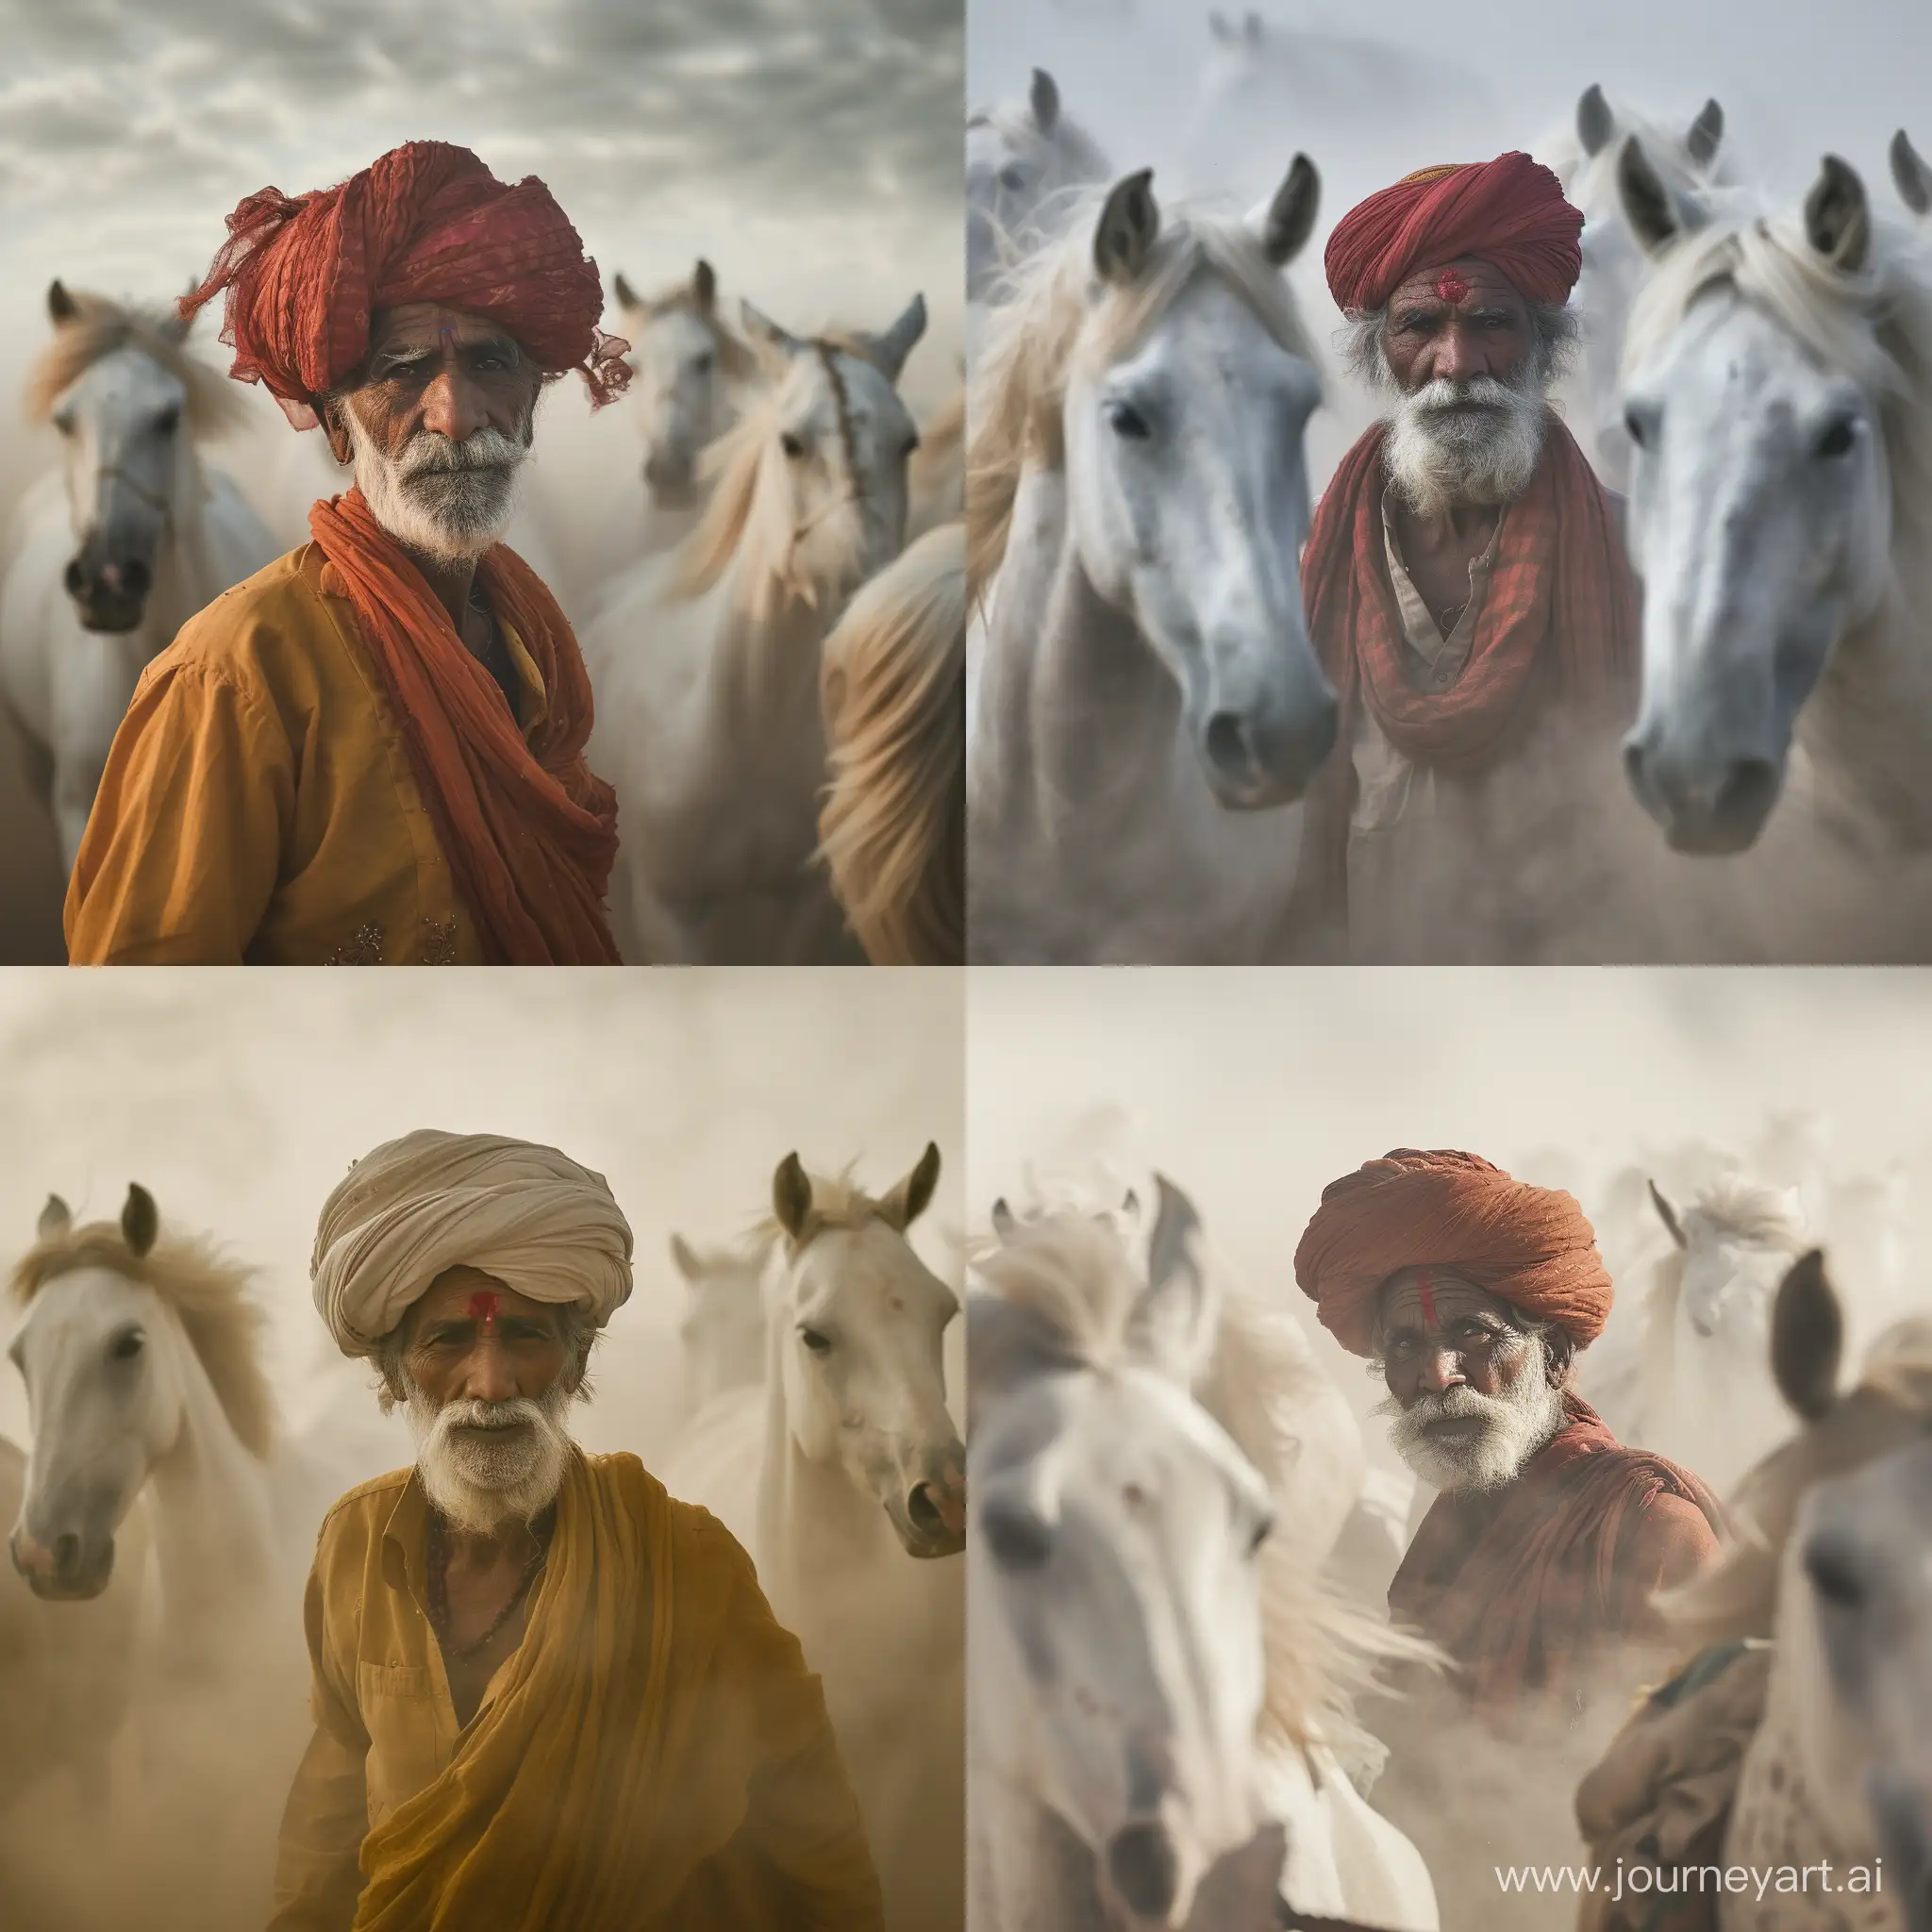 elderly rabari rajasthan  with turban is standing between  moving white horses  with a lot of dust around 50 mm fij xt4 foto realistisch total body low angle